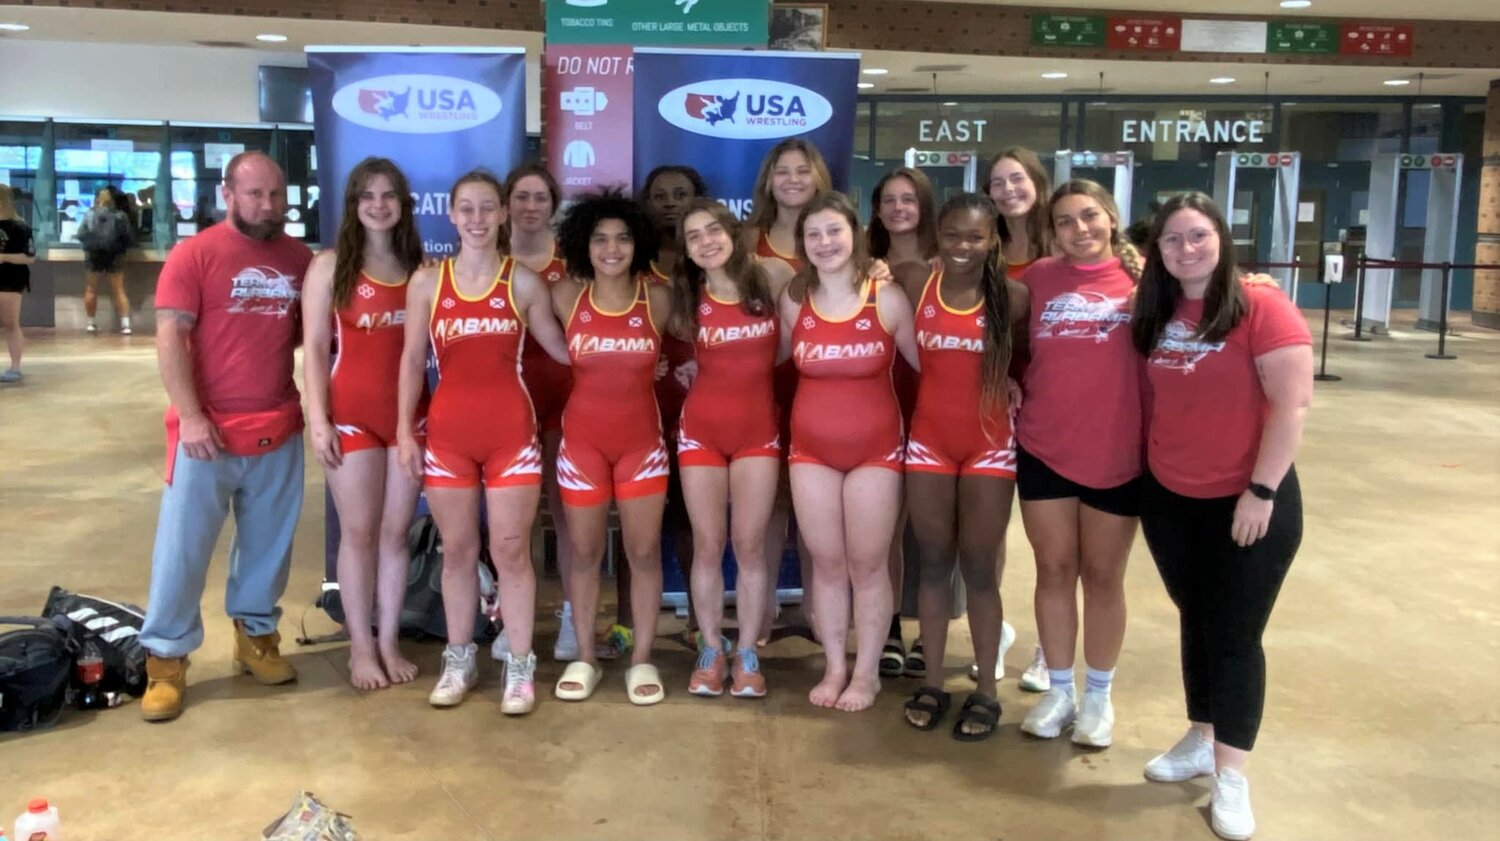 Team Alabama poses for a picture at the women’s 16U and Junior Nationals in Fargo, North Dakota, on Saturday, July 15. Three Baldwin County wrestlers competed on the squad, including Daphne’s Kalyse Hill, Spanish Fort’s Abigail Pendergrass and Gulf Shores’ Leah Guthrie. Also pictured are Evelyn Holmes-Smith, Haley Pate, Teegan Robinson, Elizabeth Rosenstiel, Emily Hill, Tristin Robinson, Aniyah Griffin and Mallory Ladd alongside coaches Lillian Humphries, Kyle Stiffler and Yasmine Oliveira.